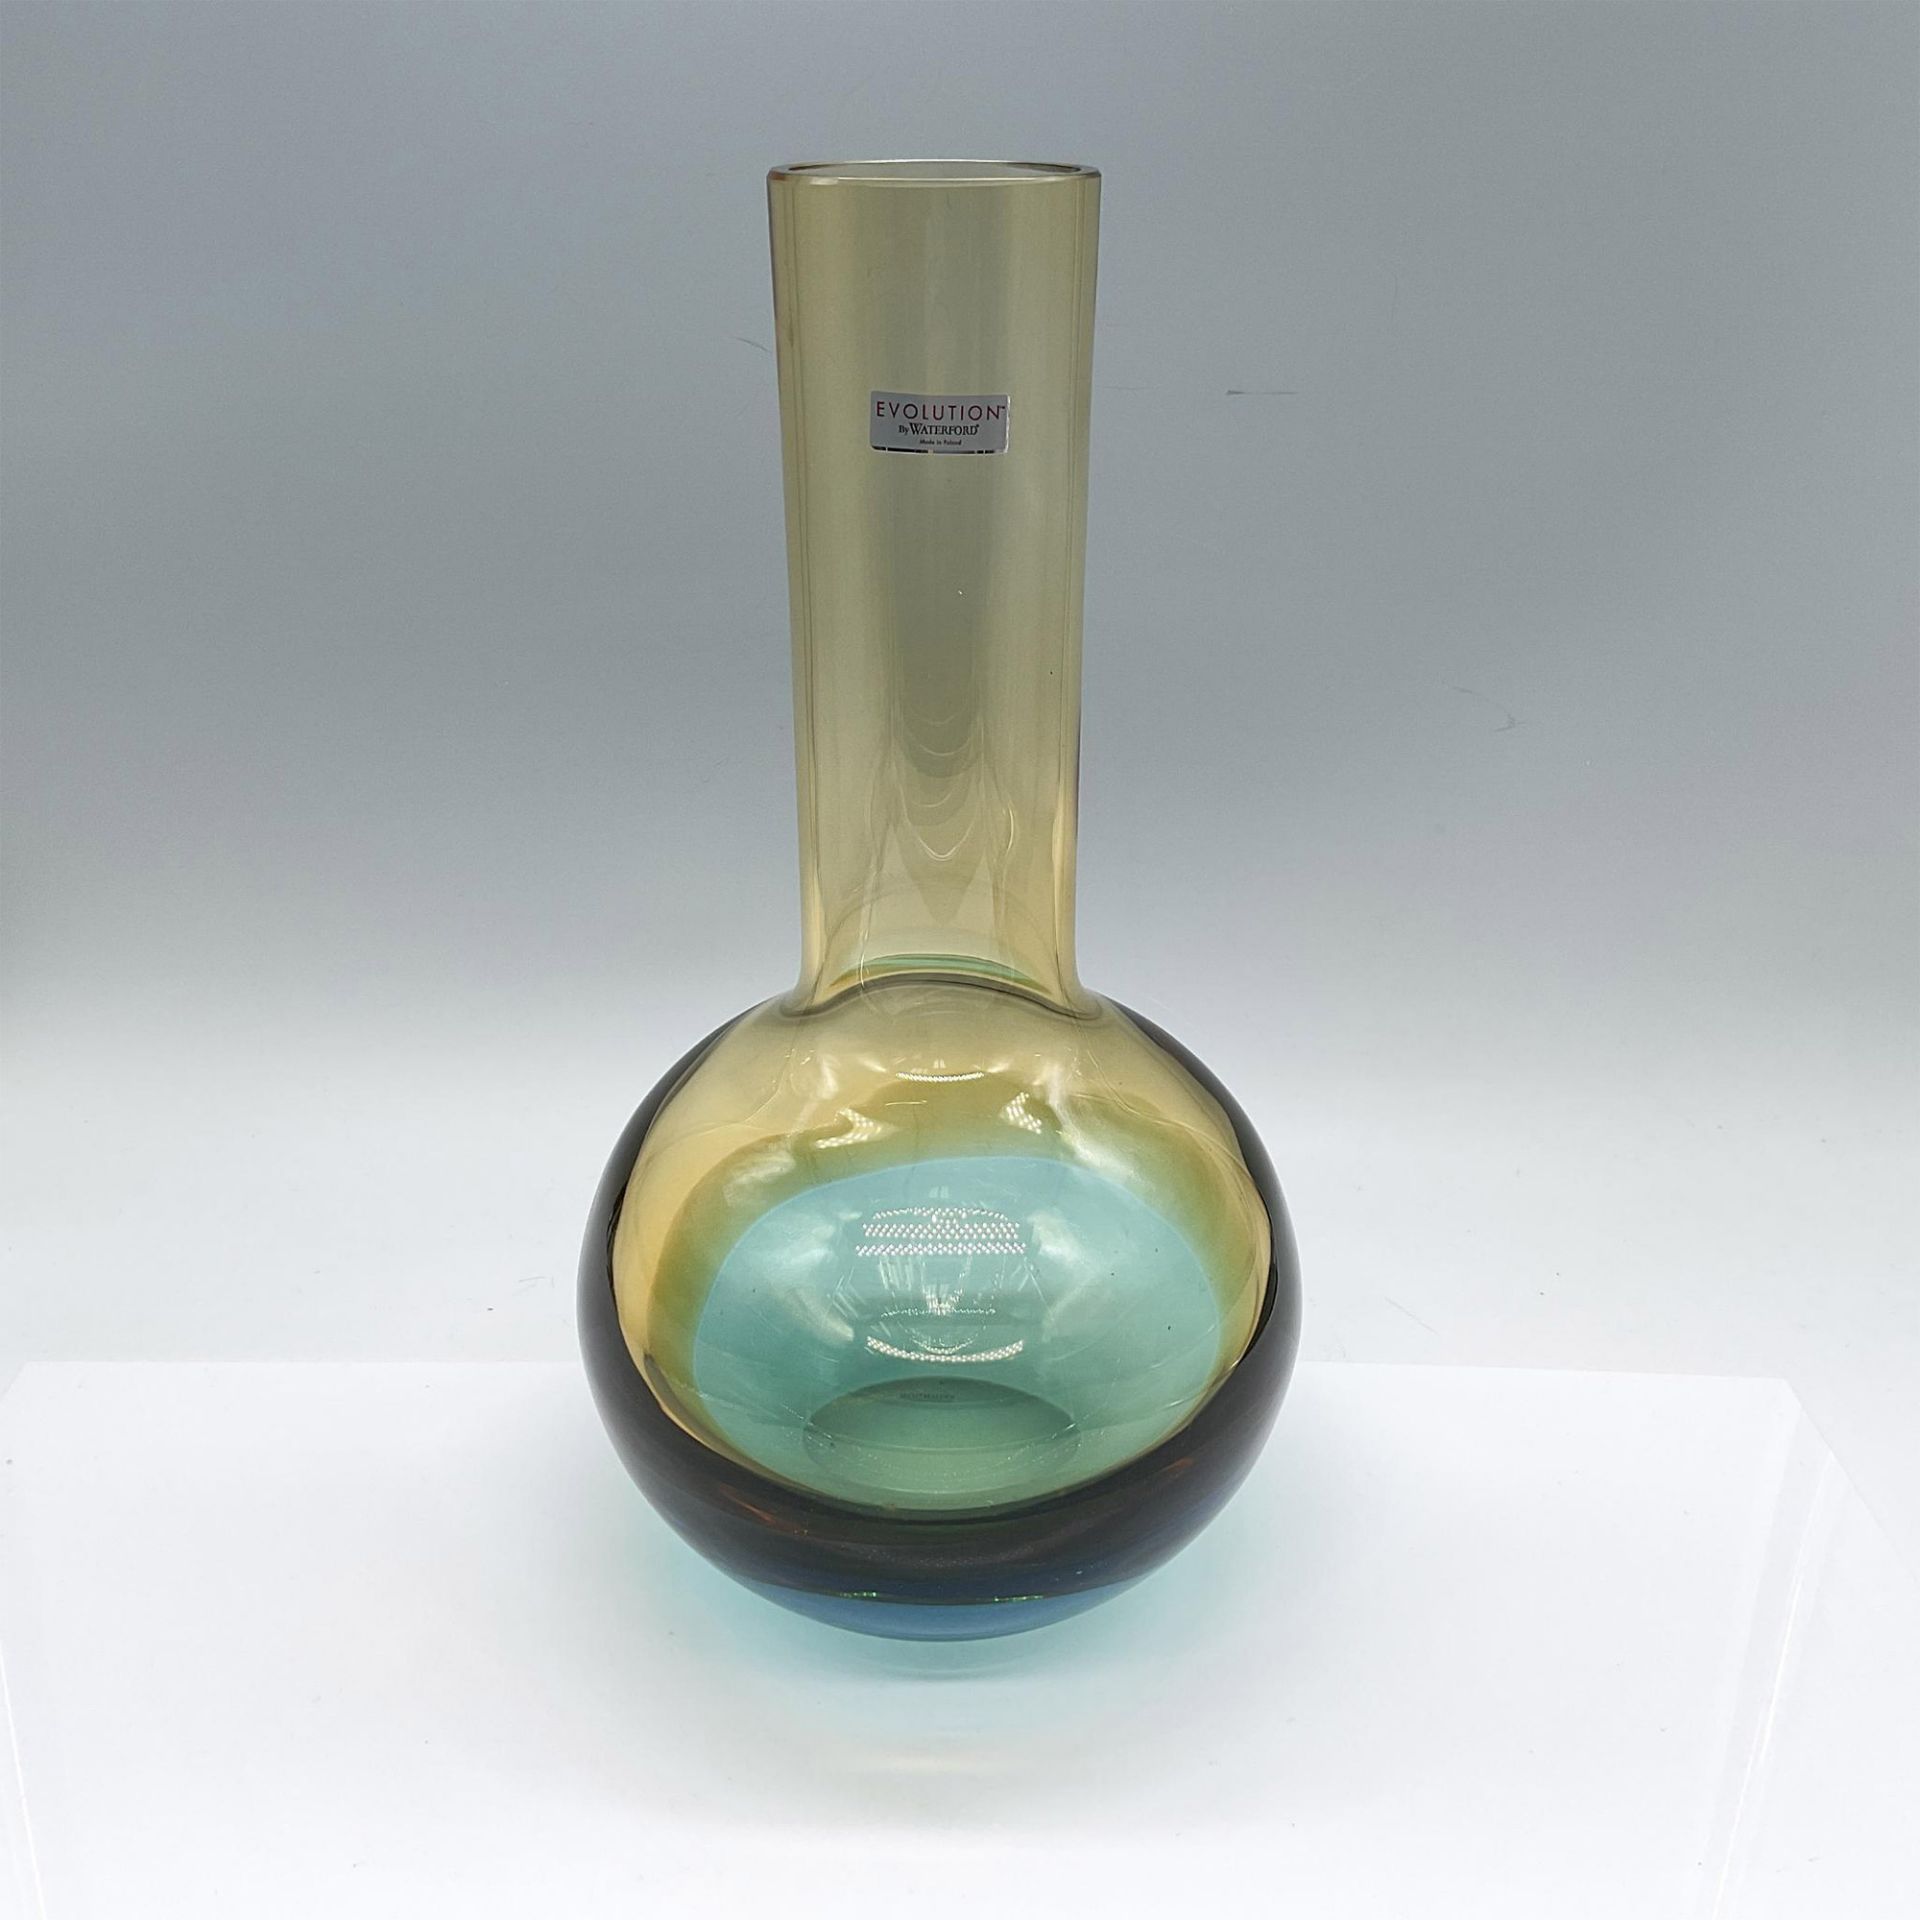 Waterford Turquoise and Amber Vase, Evolution